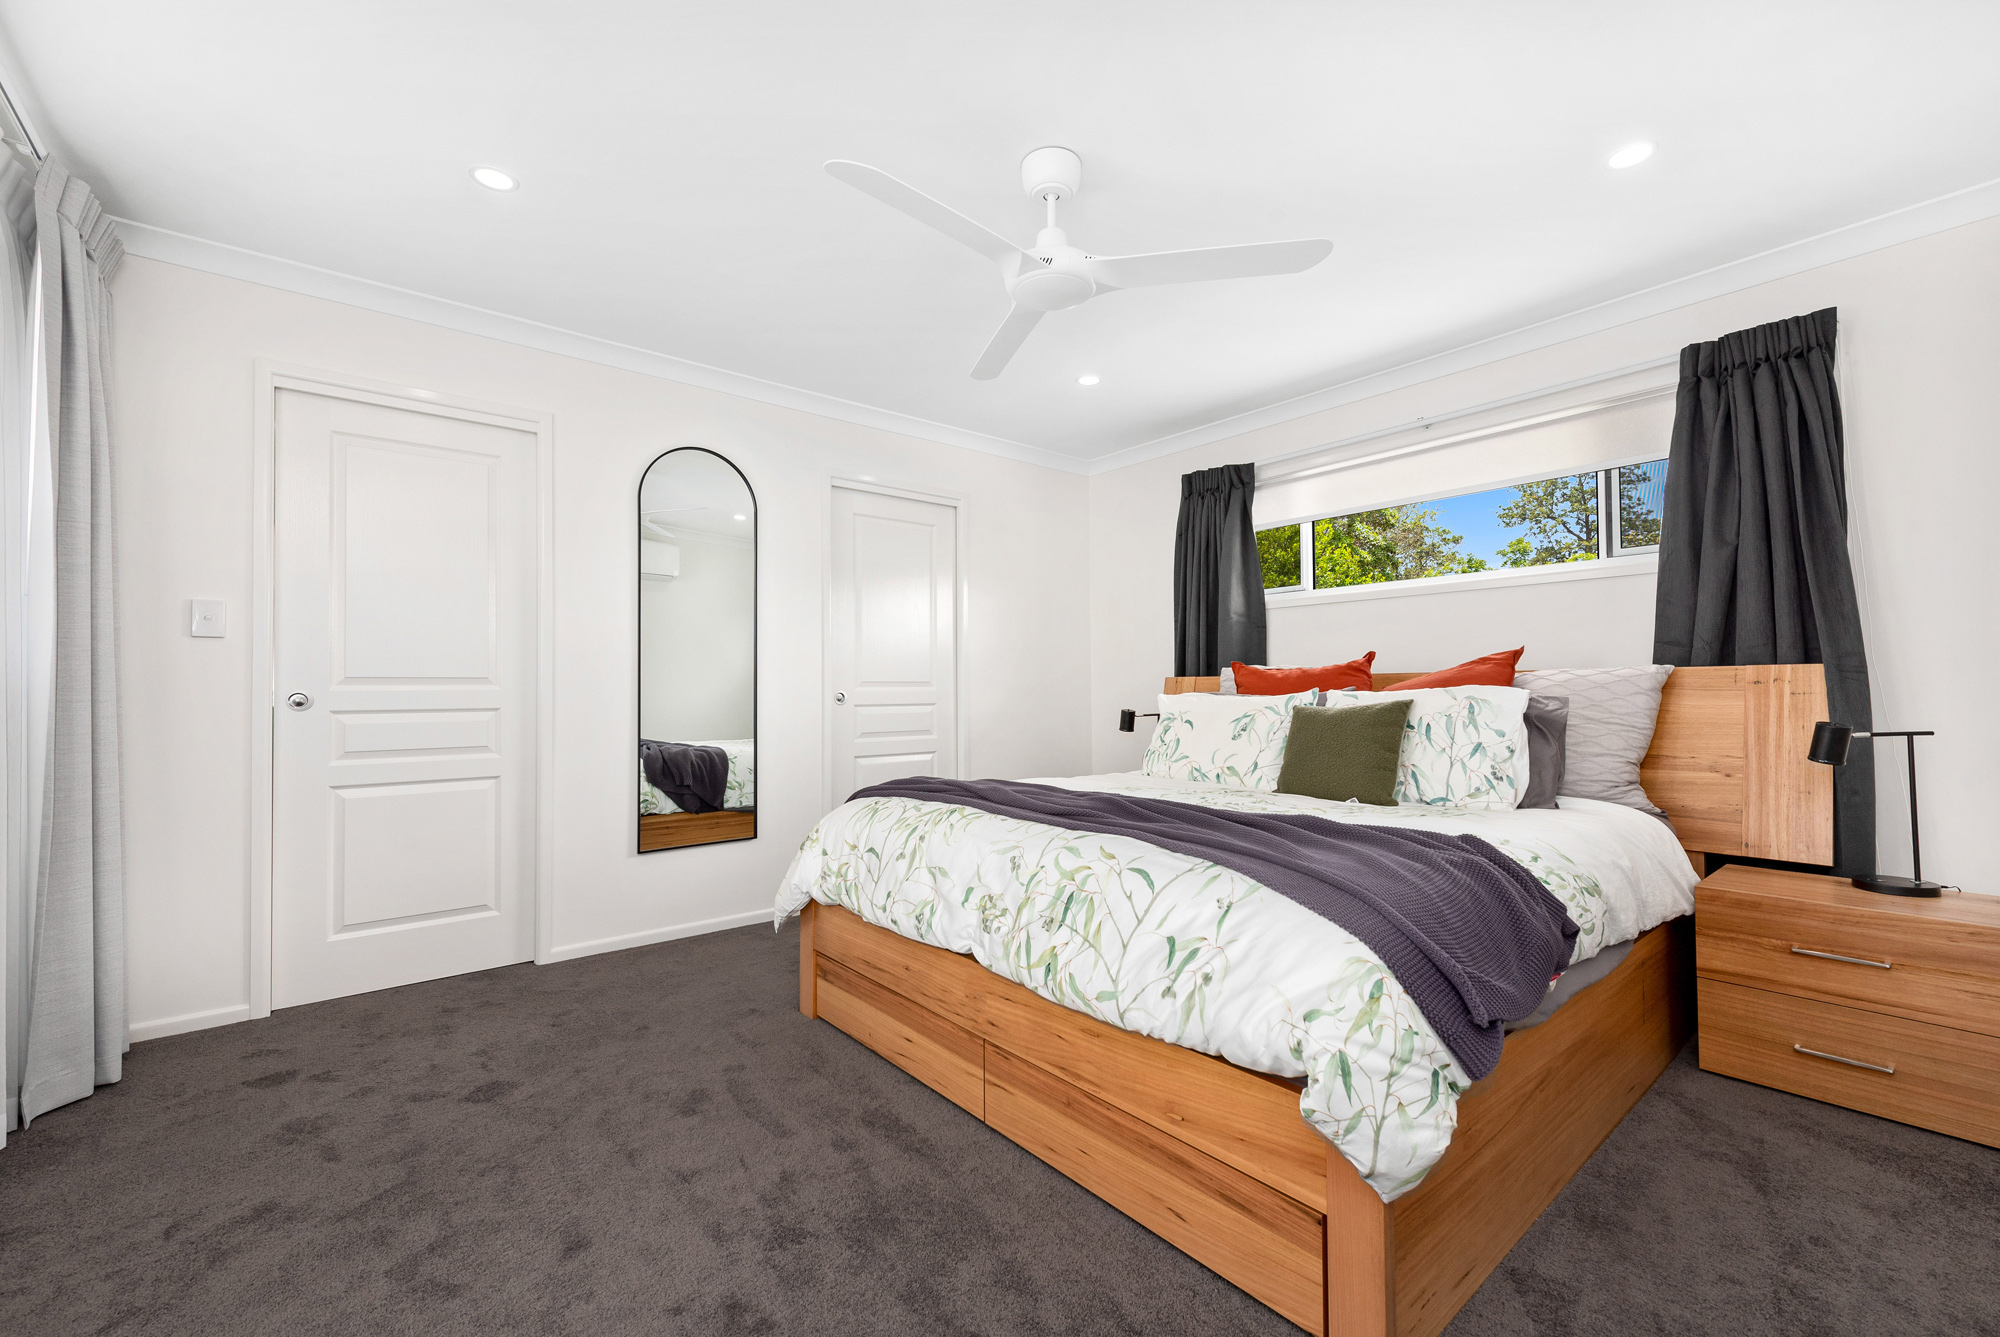 Second storey master bedroom with grey carpet and wooden king bed